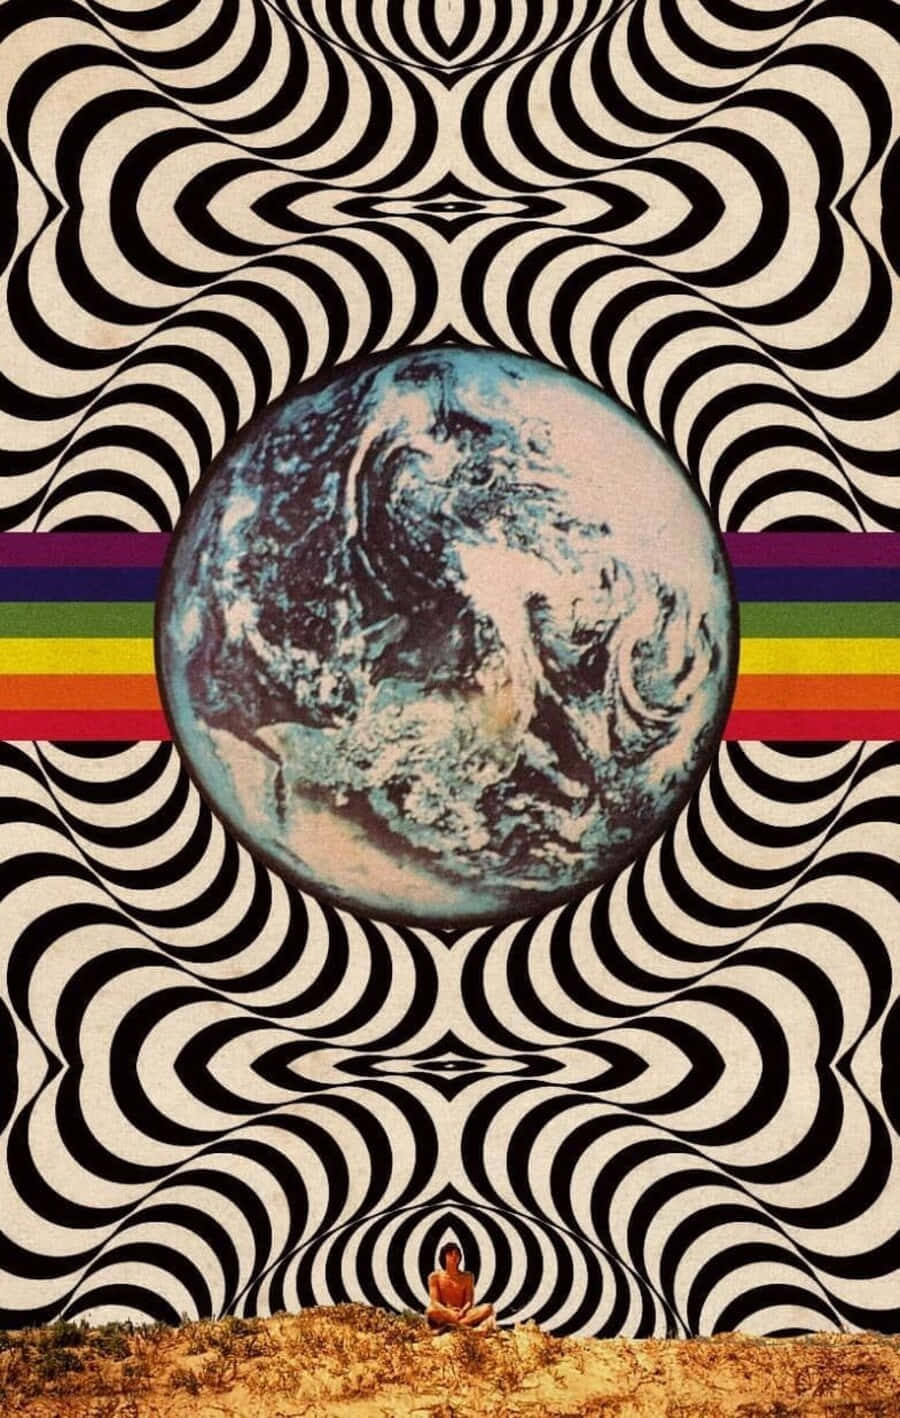 Groovy Psychedelic 70s Aesthetic Wallpaper